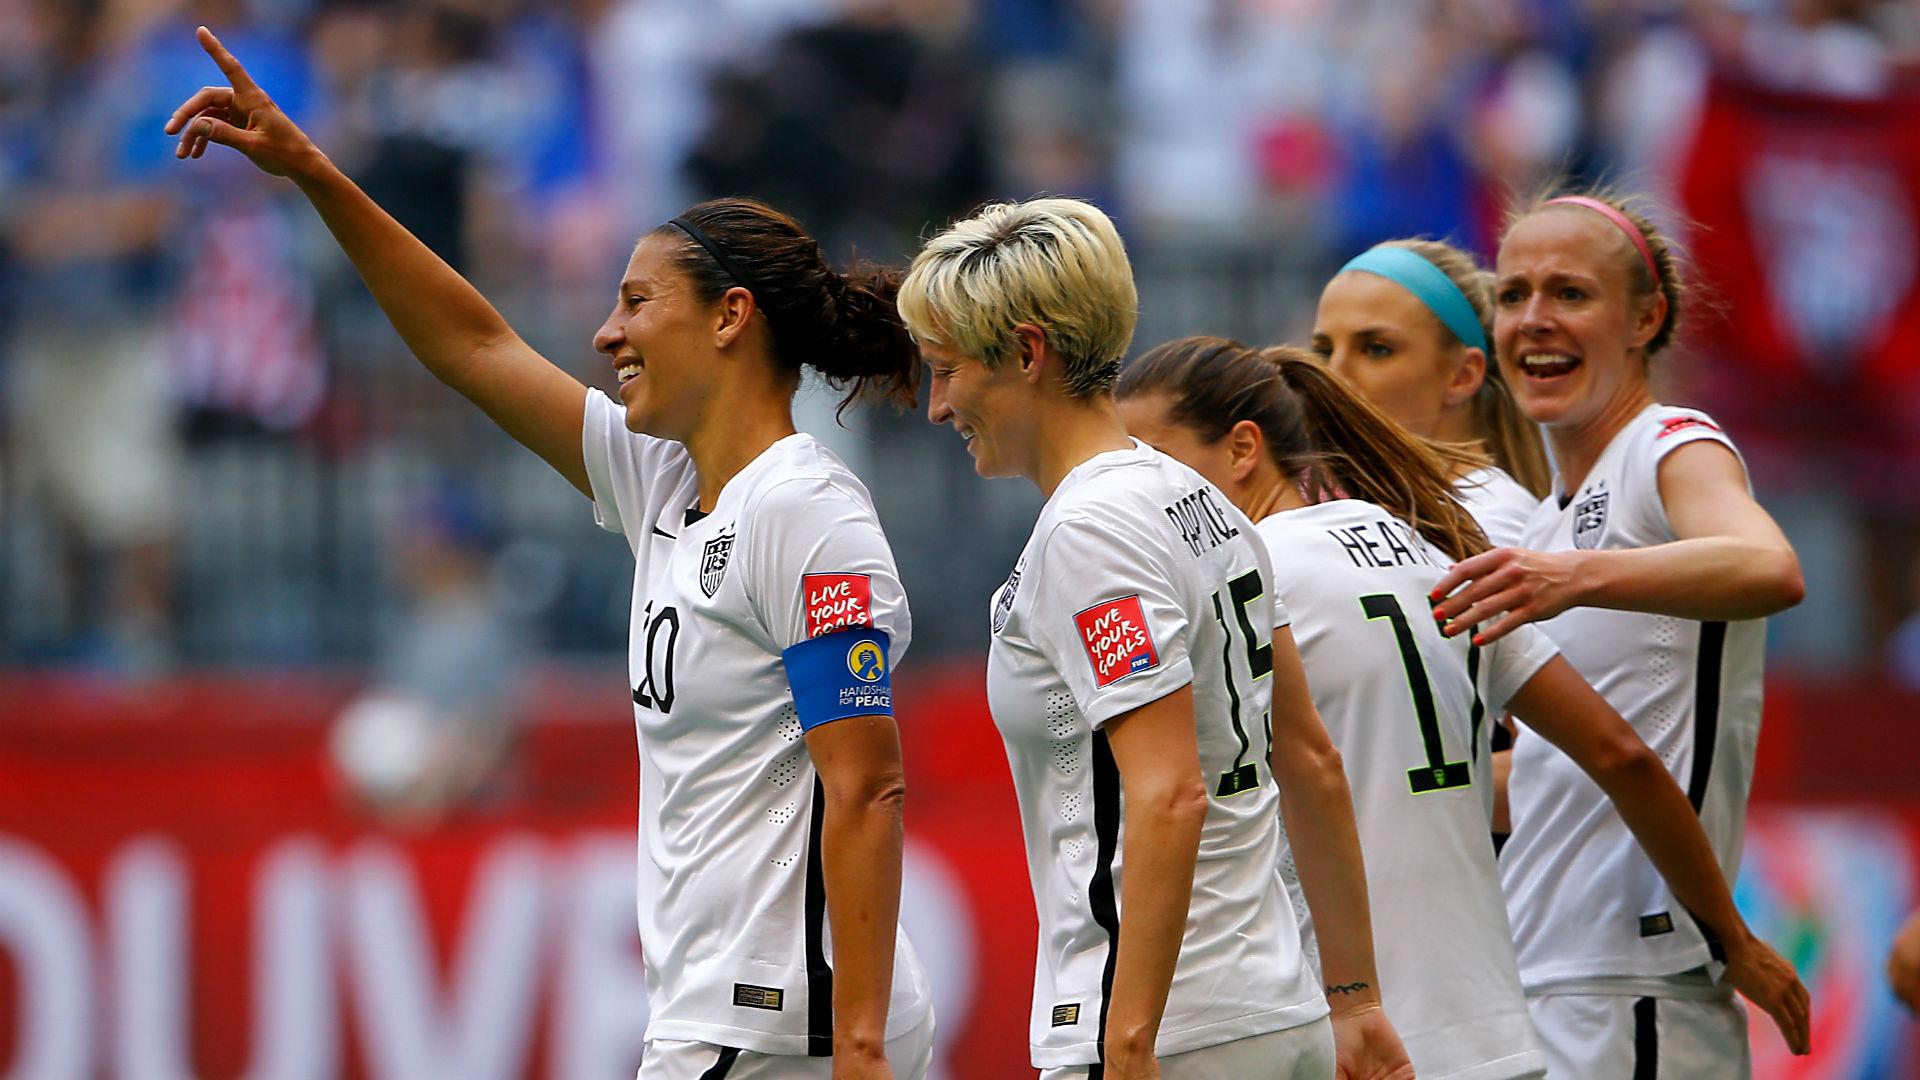 Carli Lloyd In NYT: 'We're Sick Of Being Treated Like Second Class